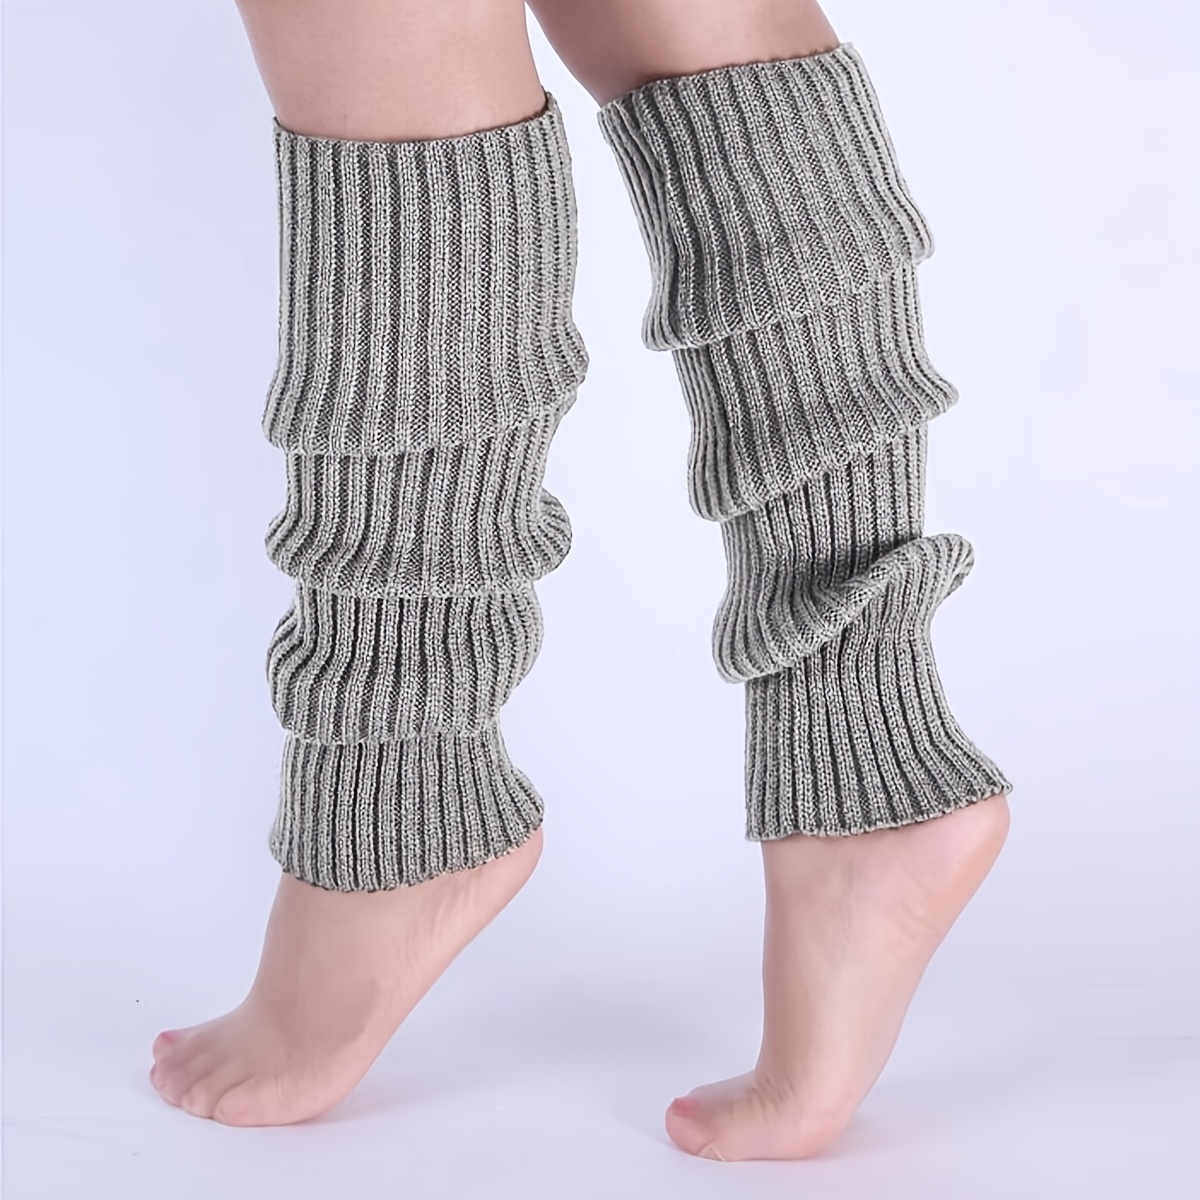 How to Knit Leg Warmers